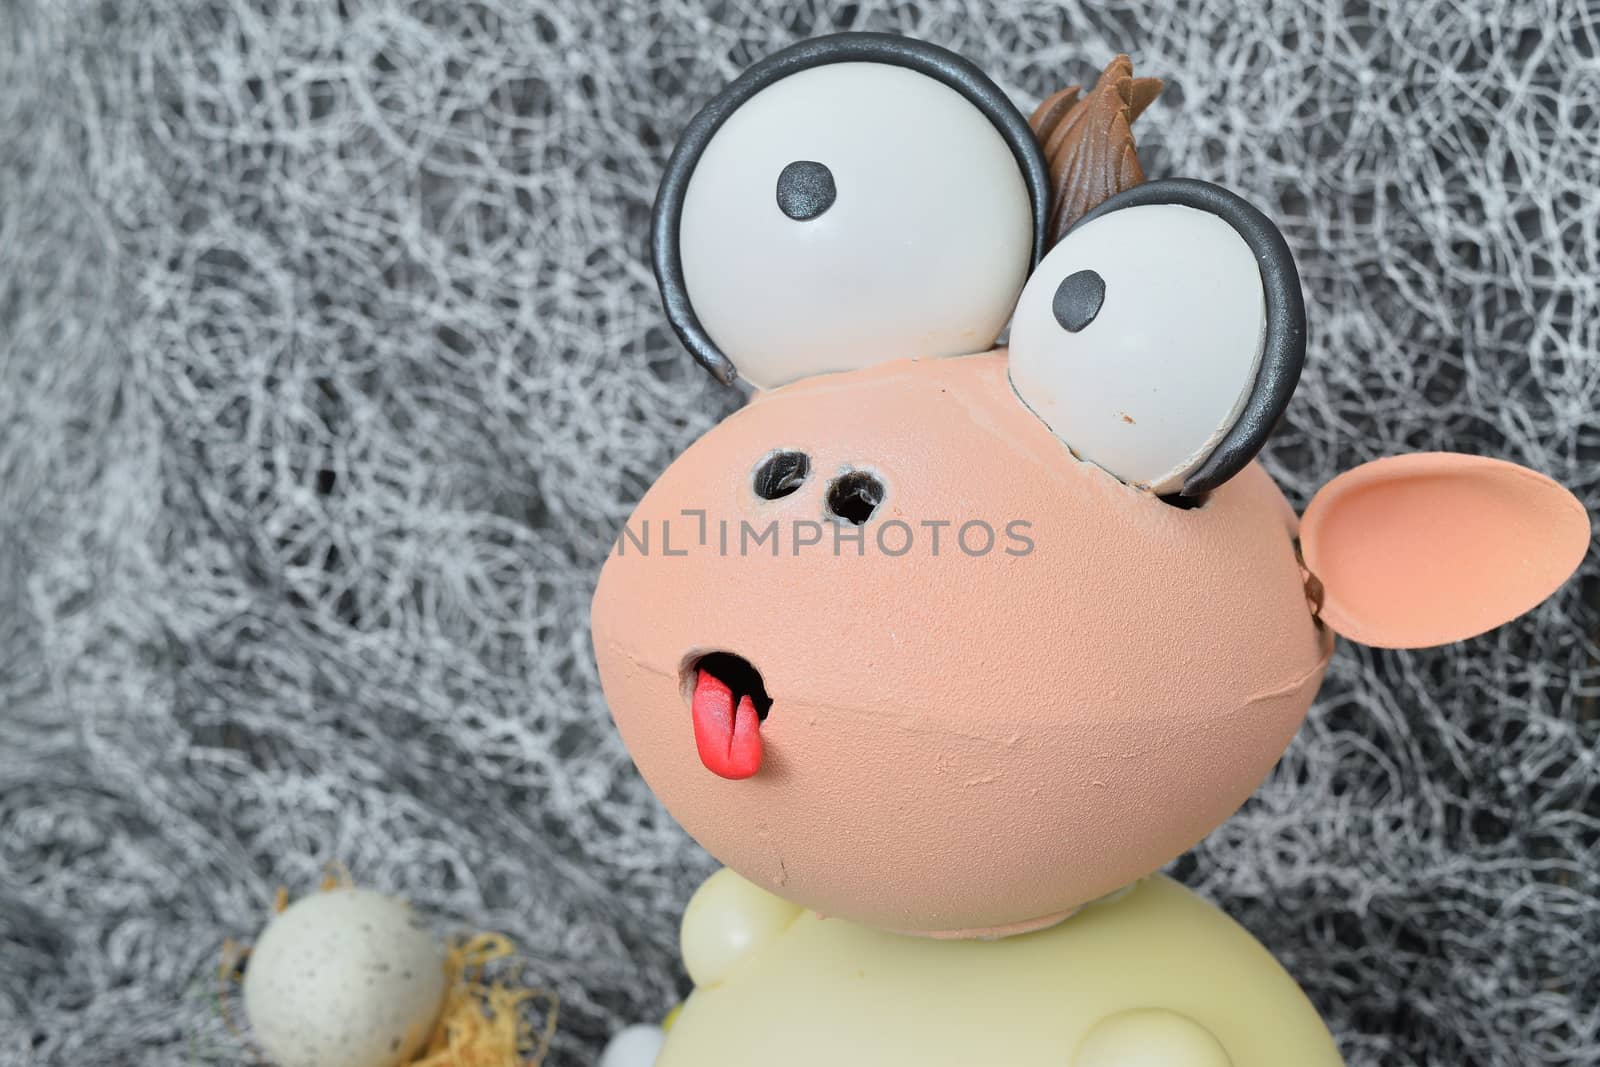 chocolate egg in the shape of a lamb with various decorations